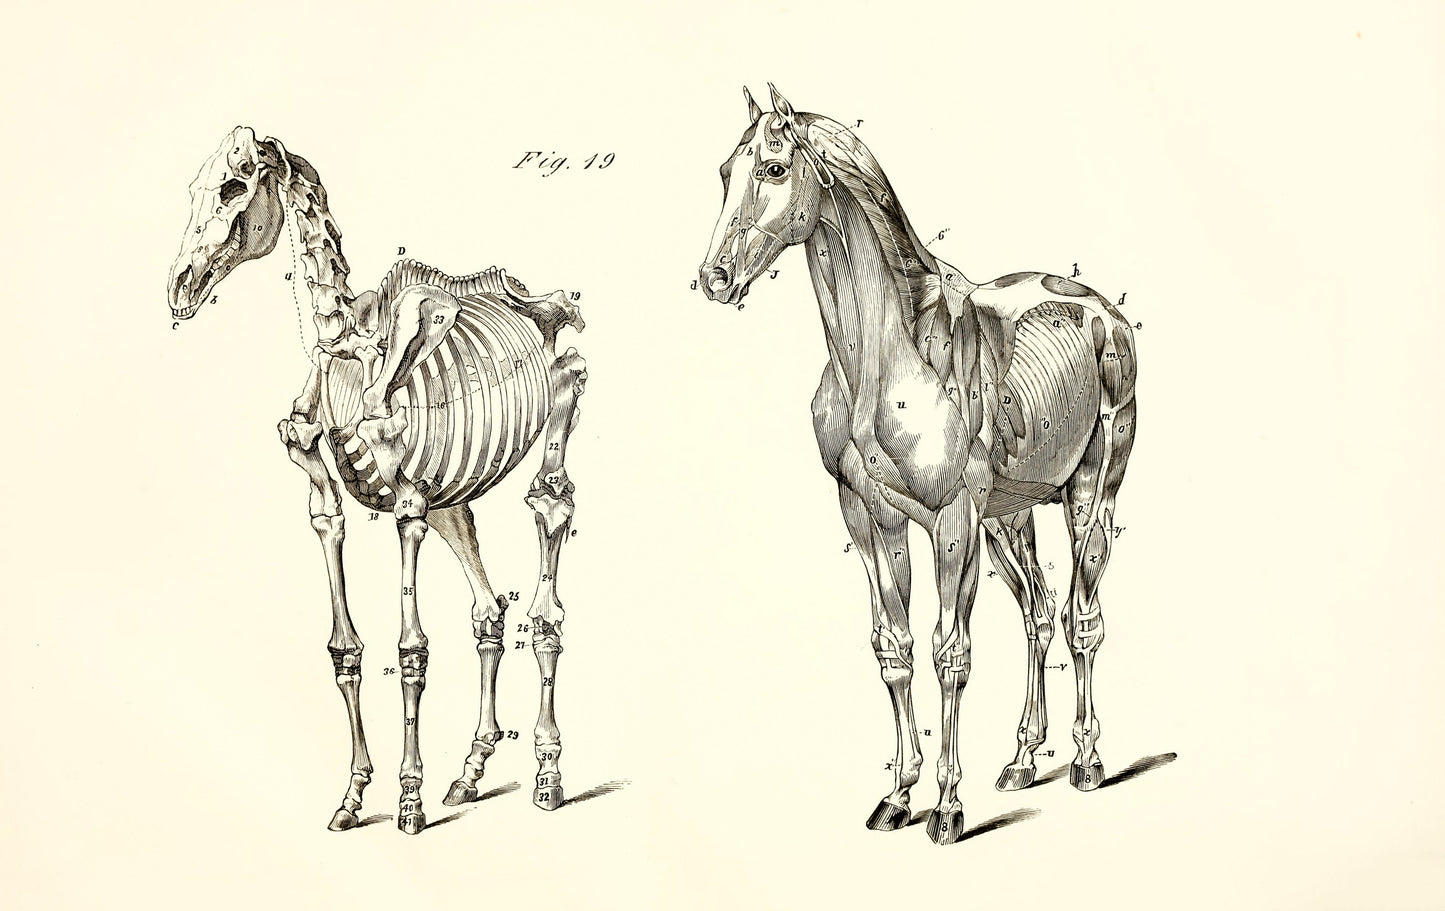 The Anatomy & Physiology of the Horse [20 Images]